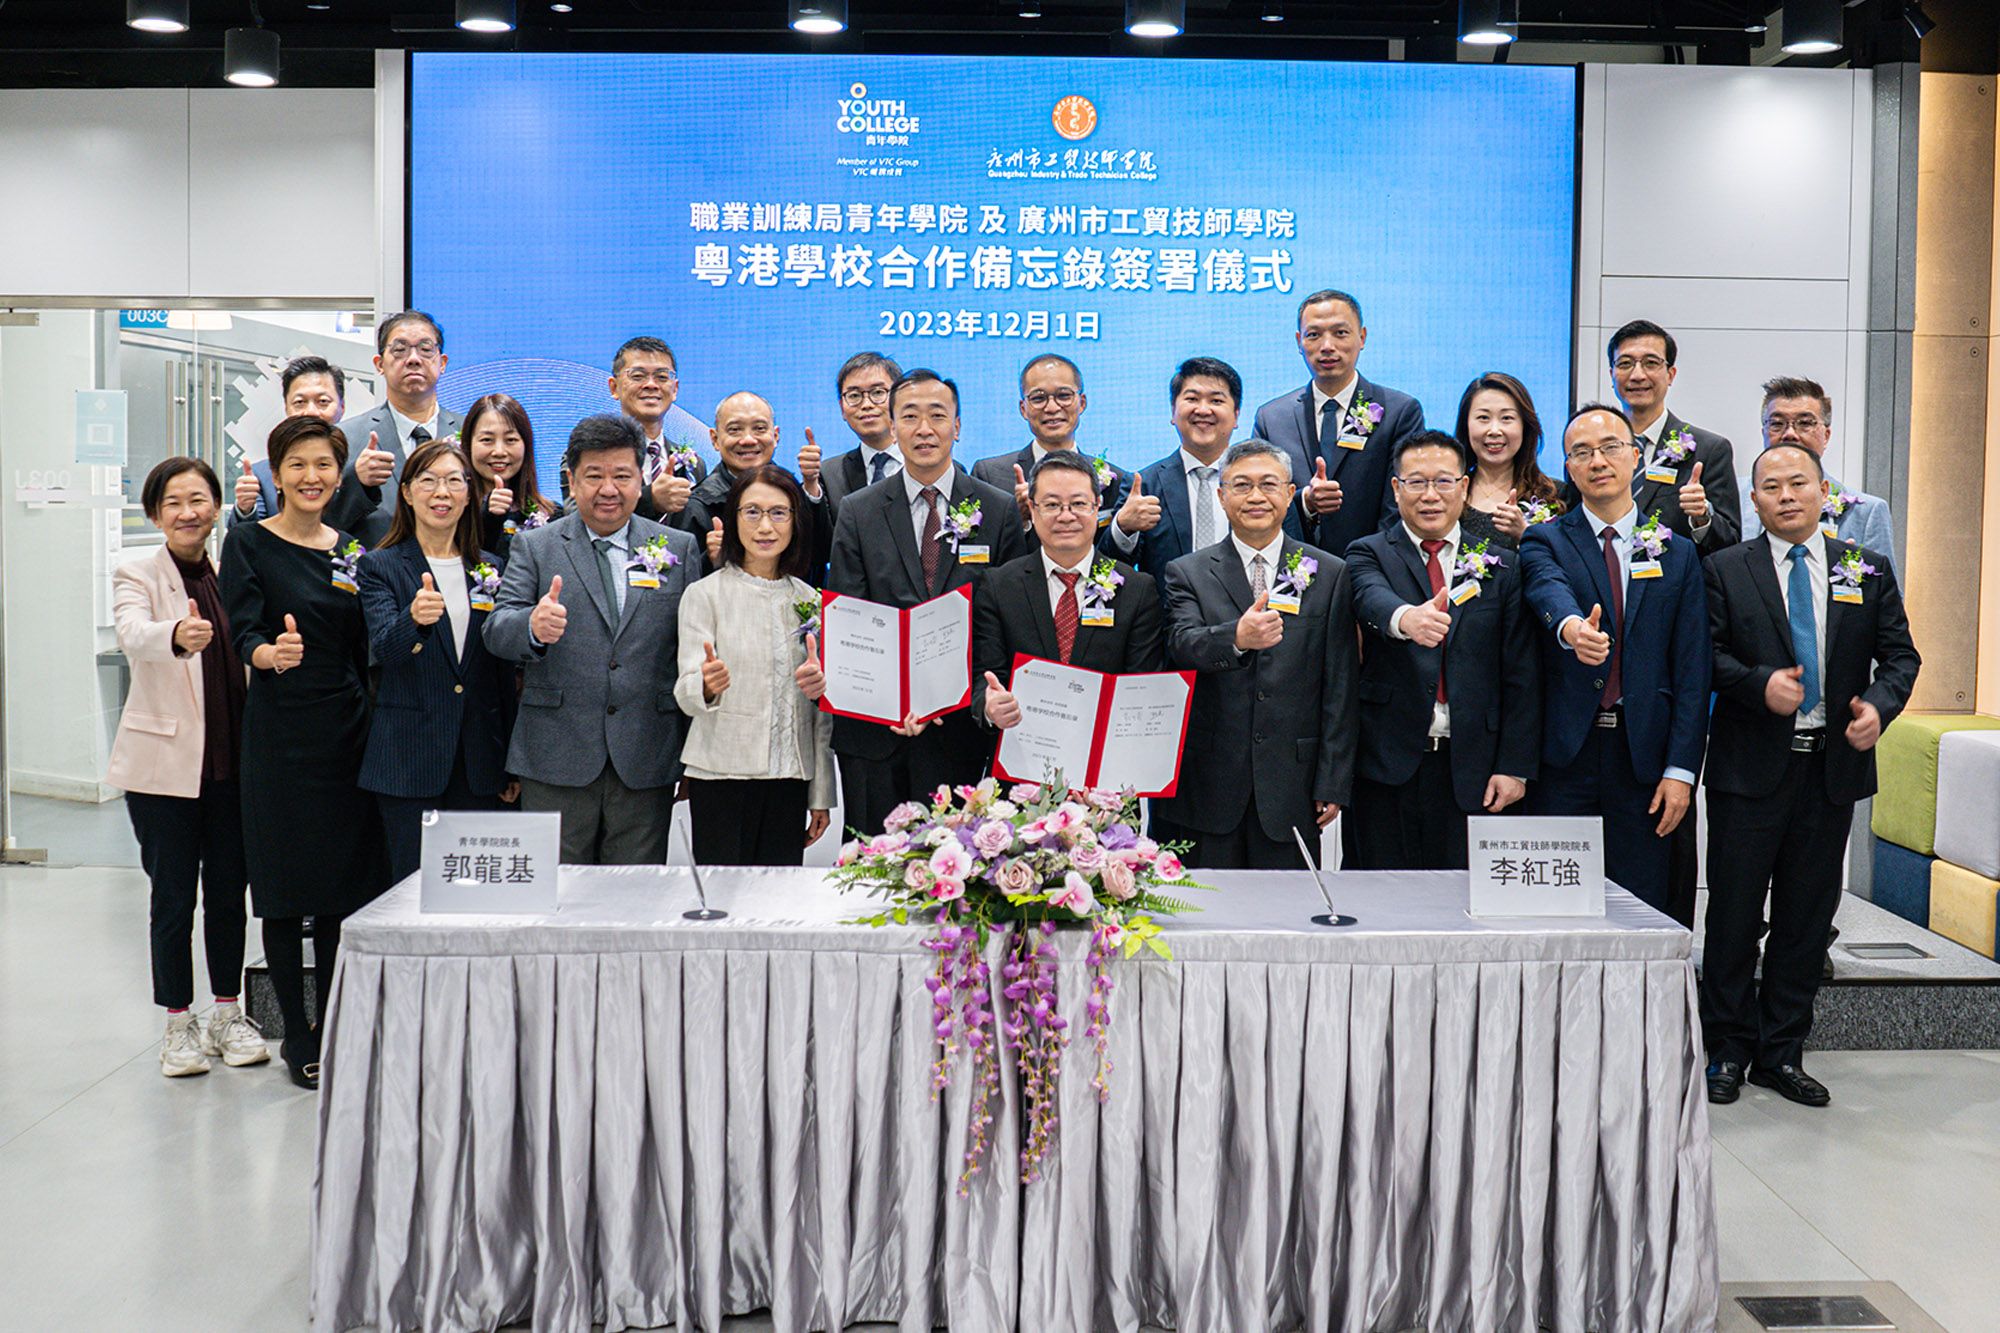 Youth College and Guangzhou Industry & Trade Technician College sign a Memorandum of Understanding